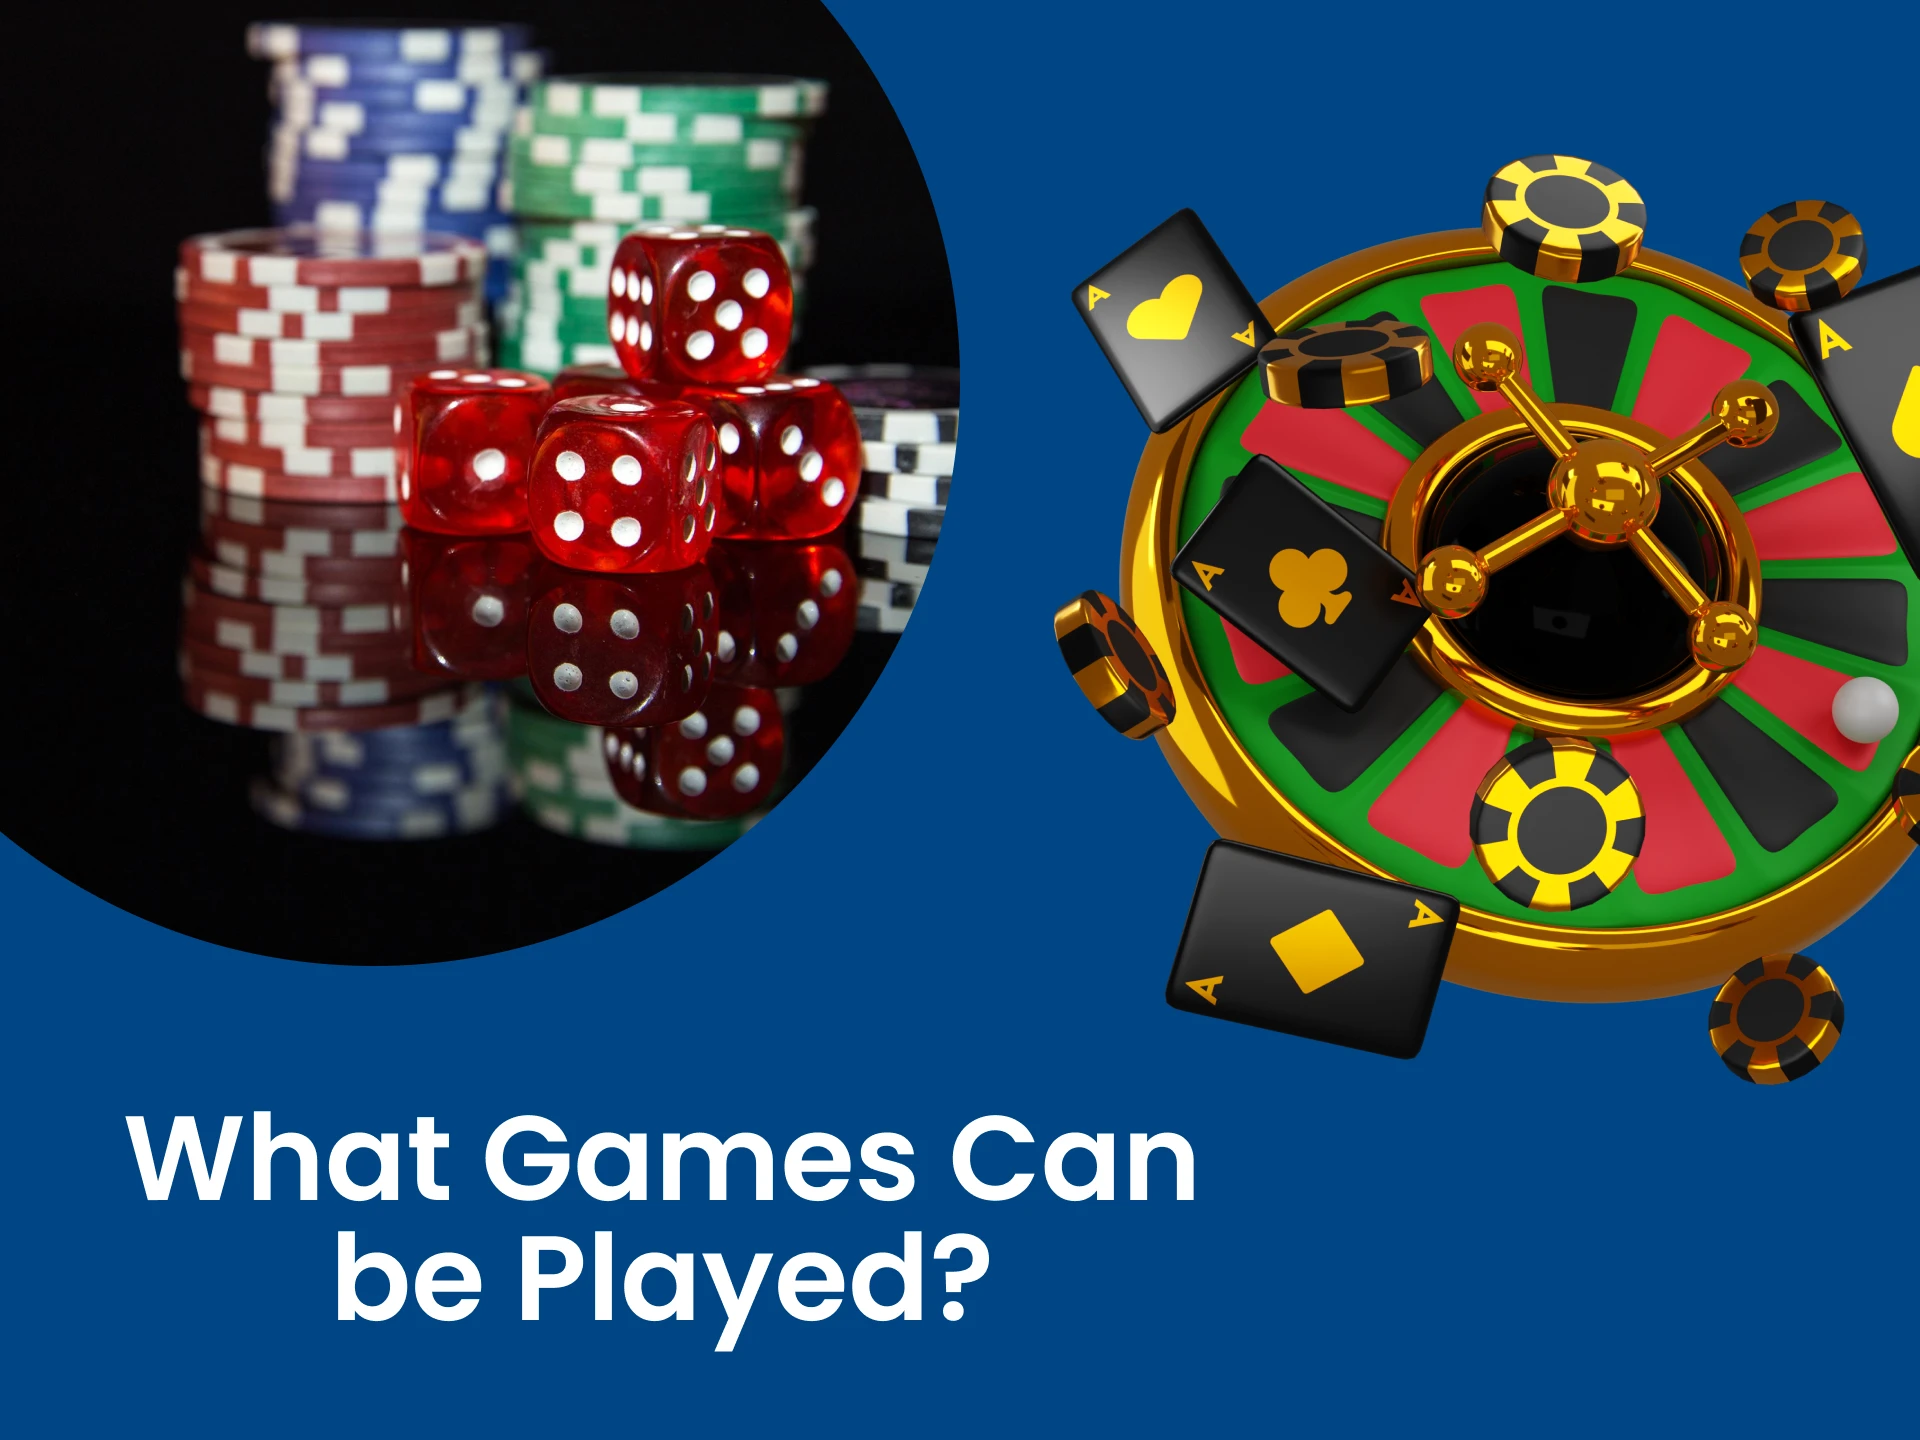 Find out what games are available in online casinos.